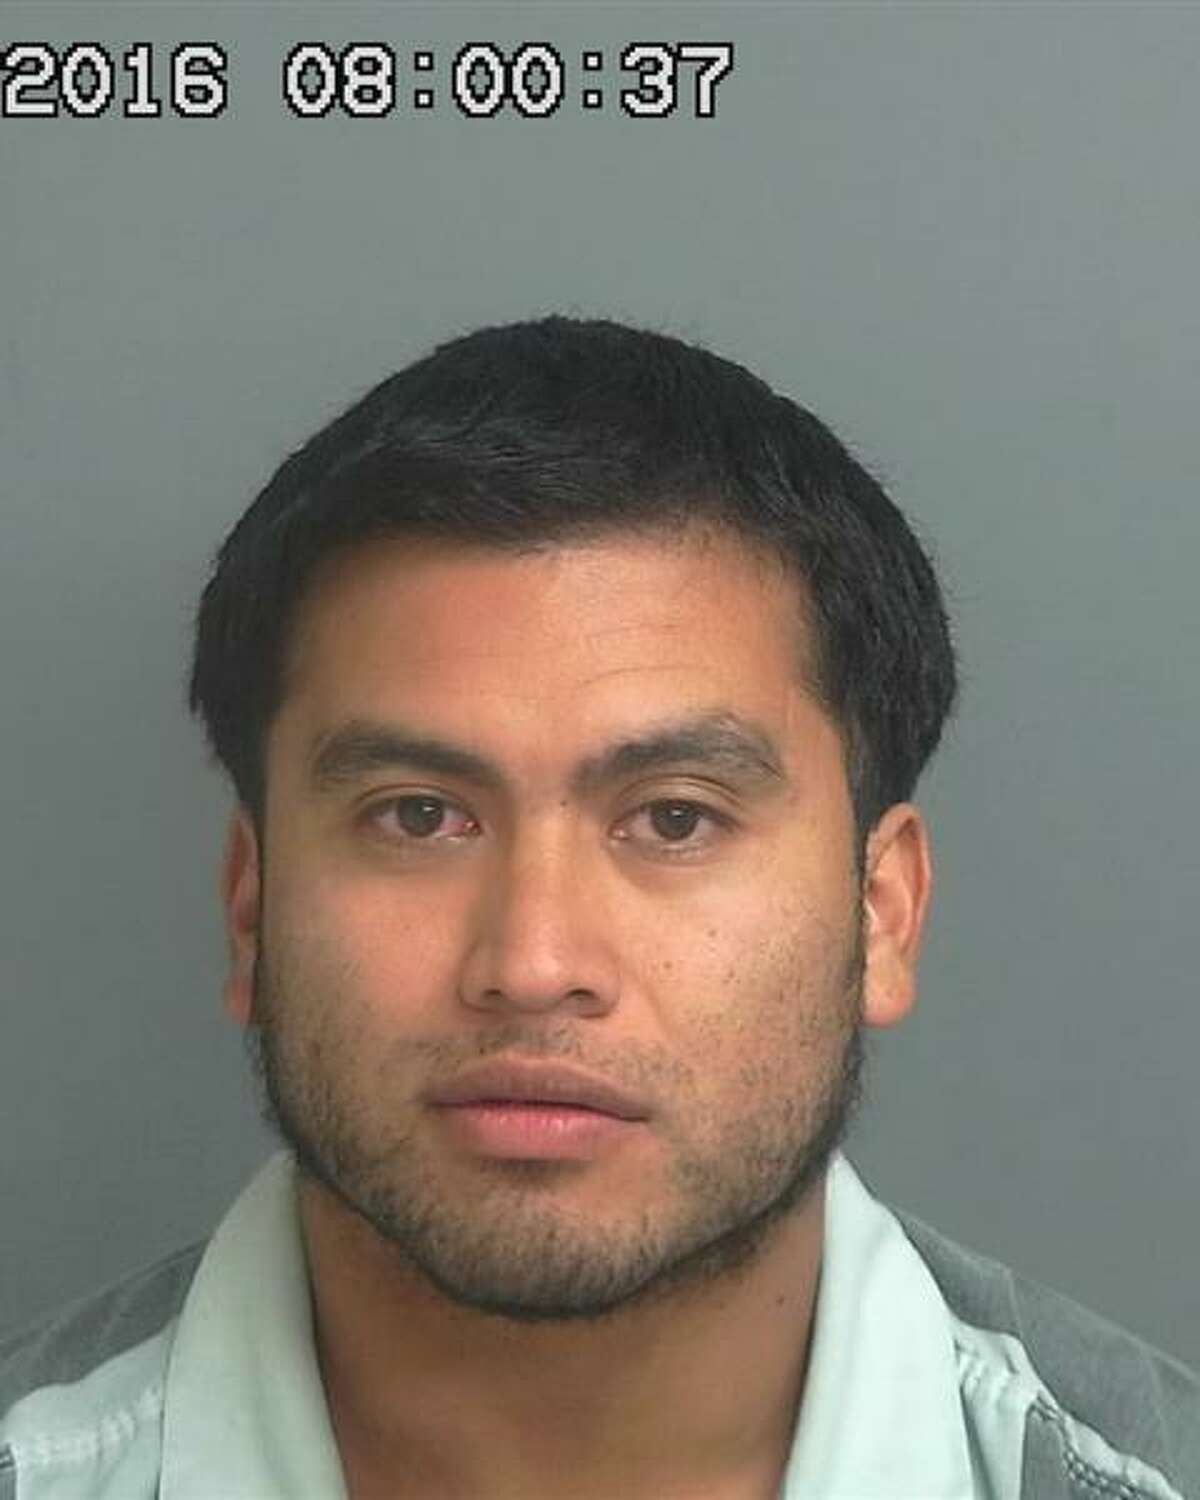 Luis A. Francisco of Cut-N-Shoot is wanted by the Montgomery County Sheriff's Office on a charge of injury to a child.